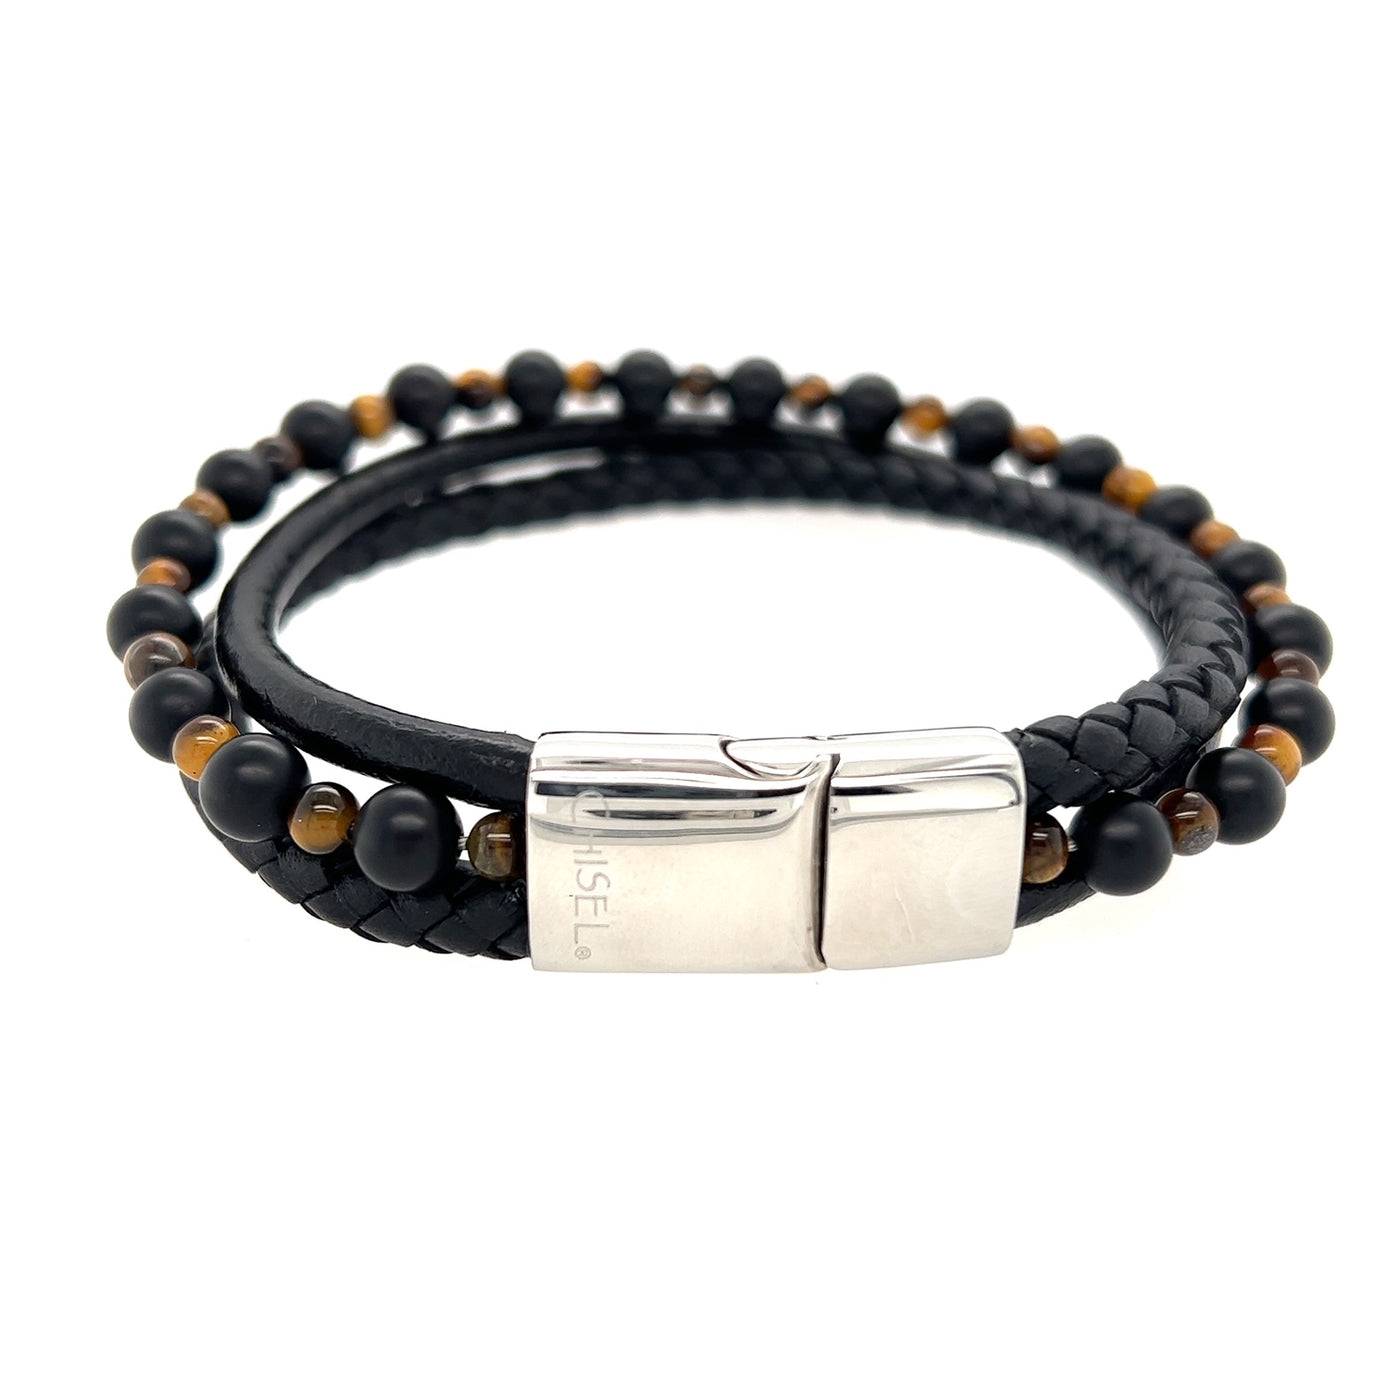 Stainless Steel Leather and Bead Stone Bracelet